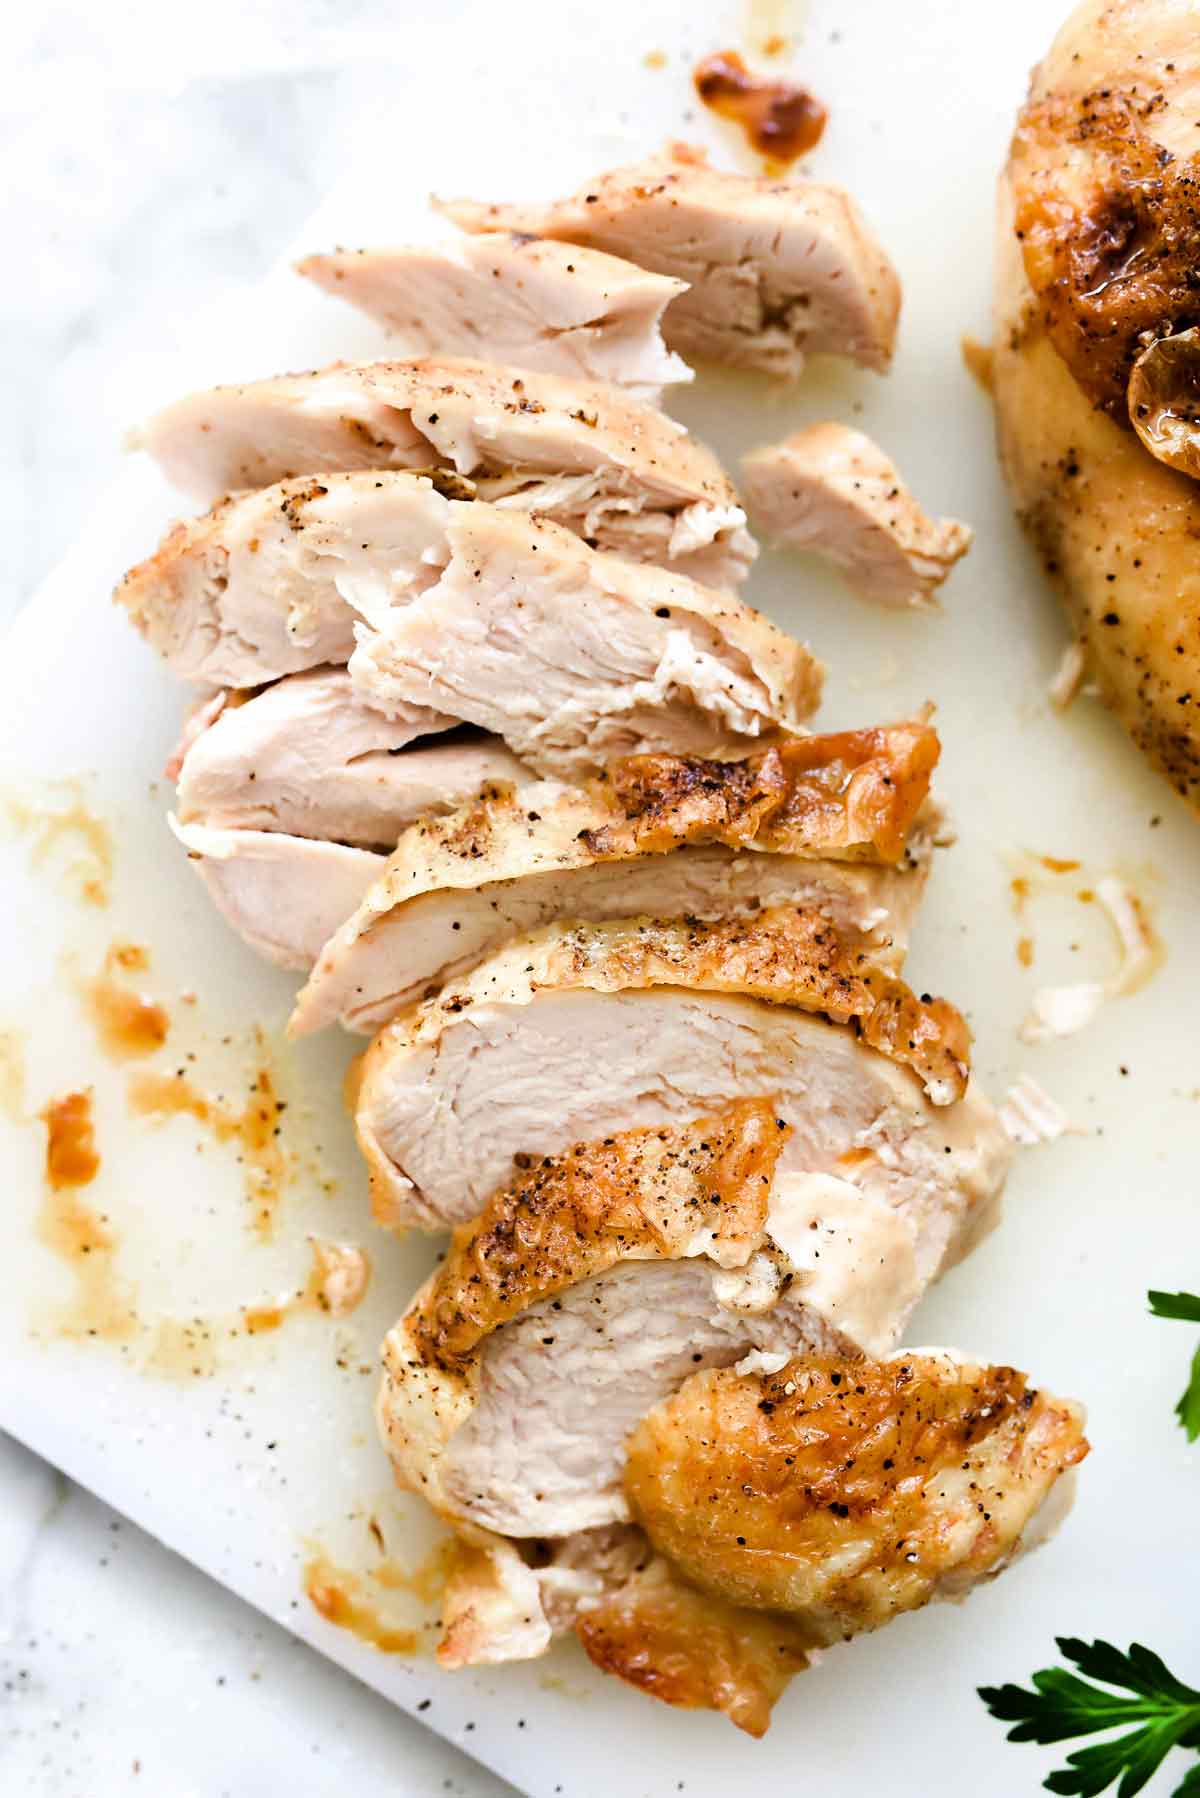 The Best Baked Chicken Breast Recipe So Juicy Foodiecrush Com,Liquid Cocaines Shot Blue Curacao